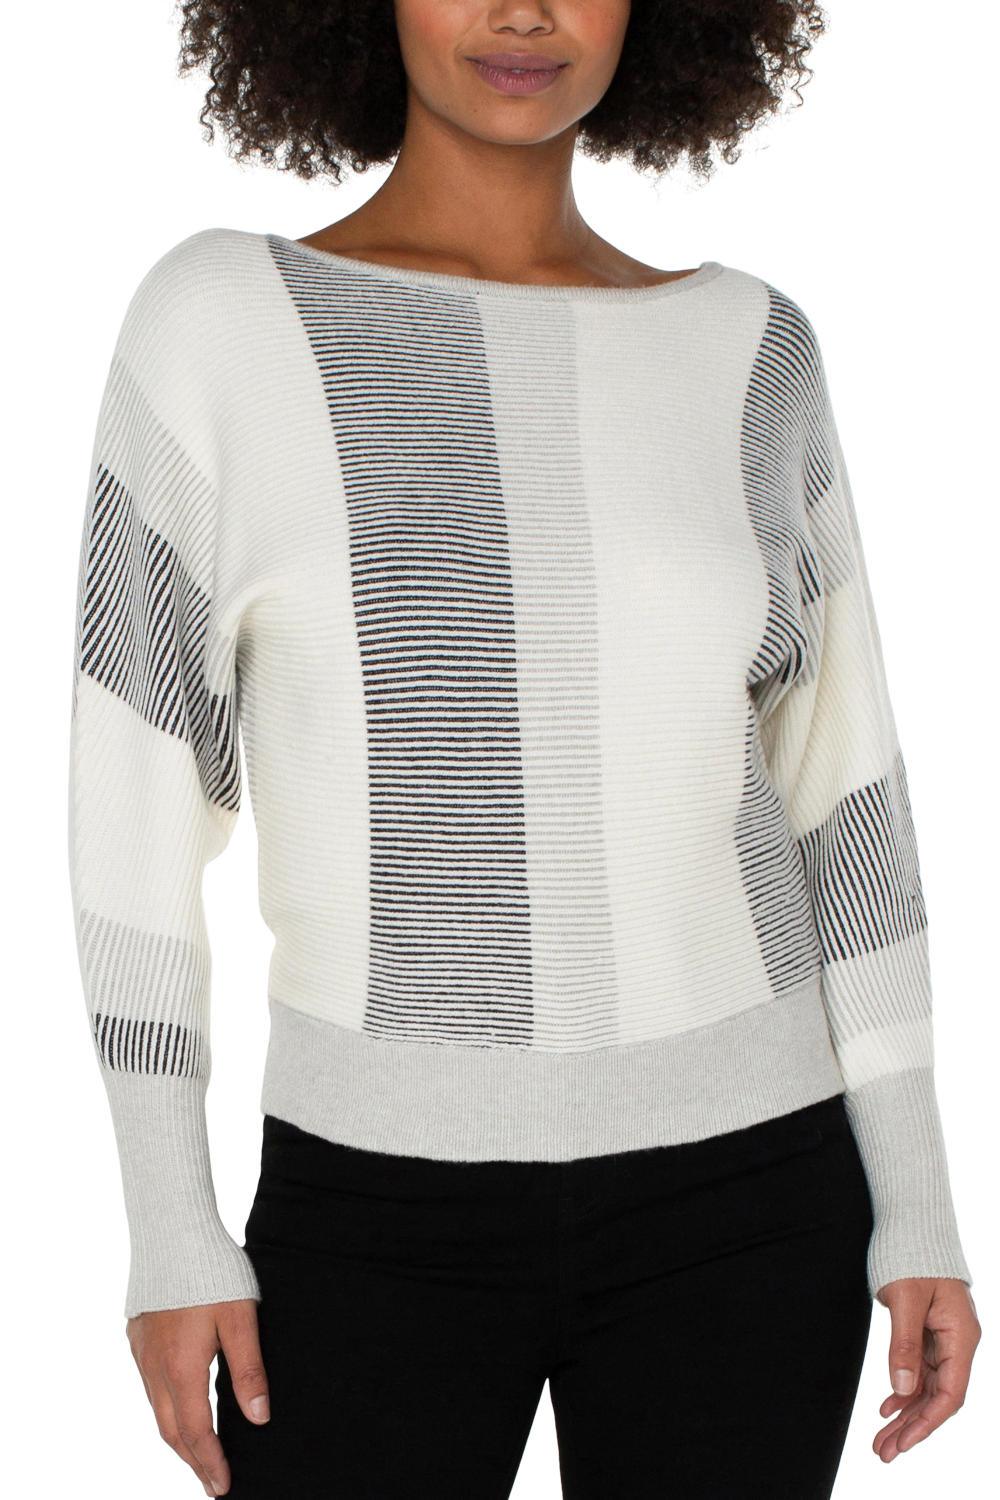 Colorblock Boat Neck Sweater - Strawberry Moon Boutique